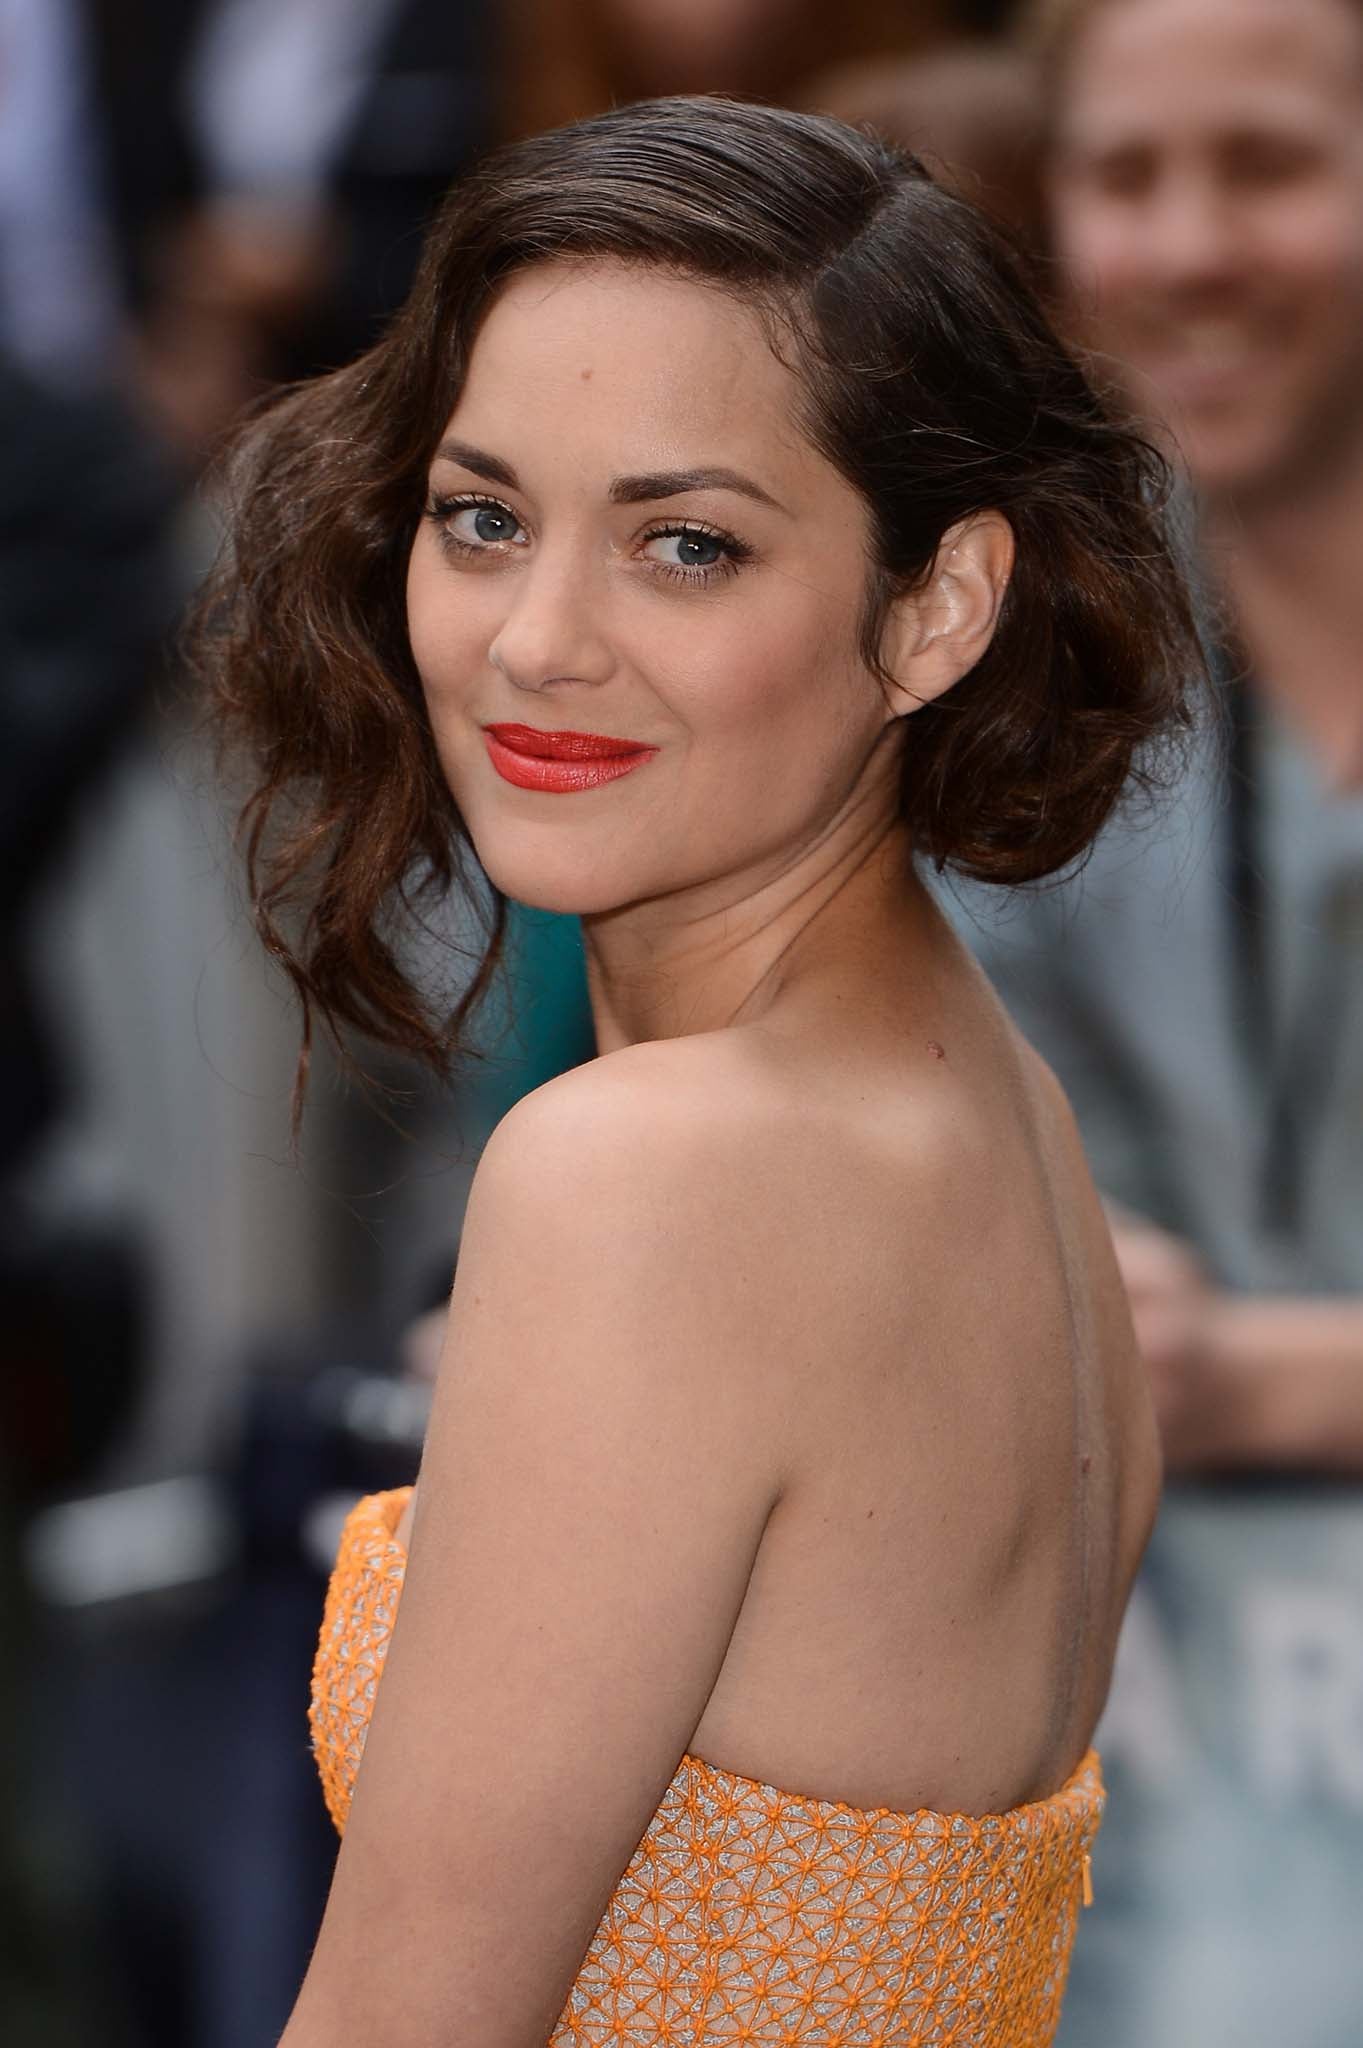 Marion Cotillard at The Dark Knight Rises premiere in July 2012.